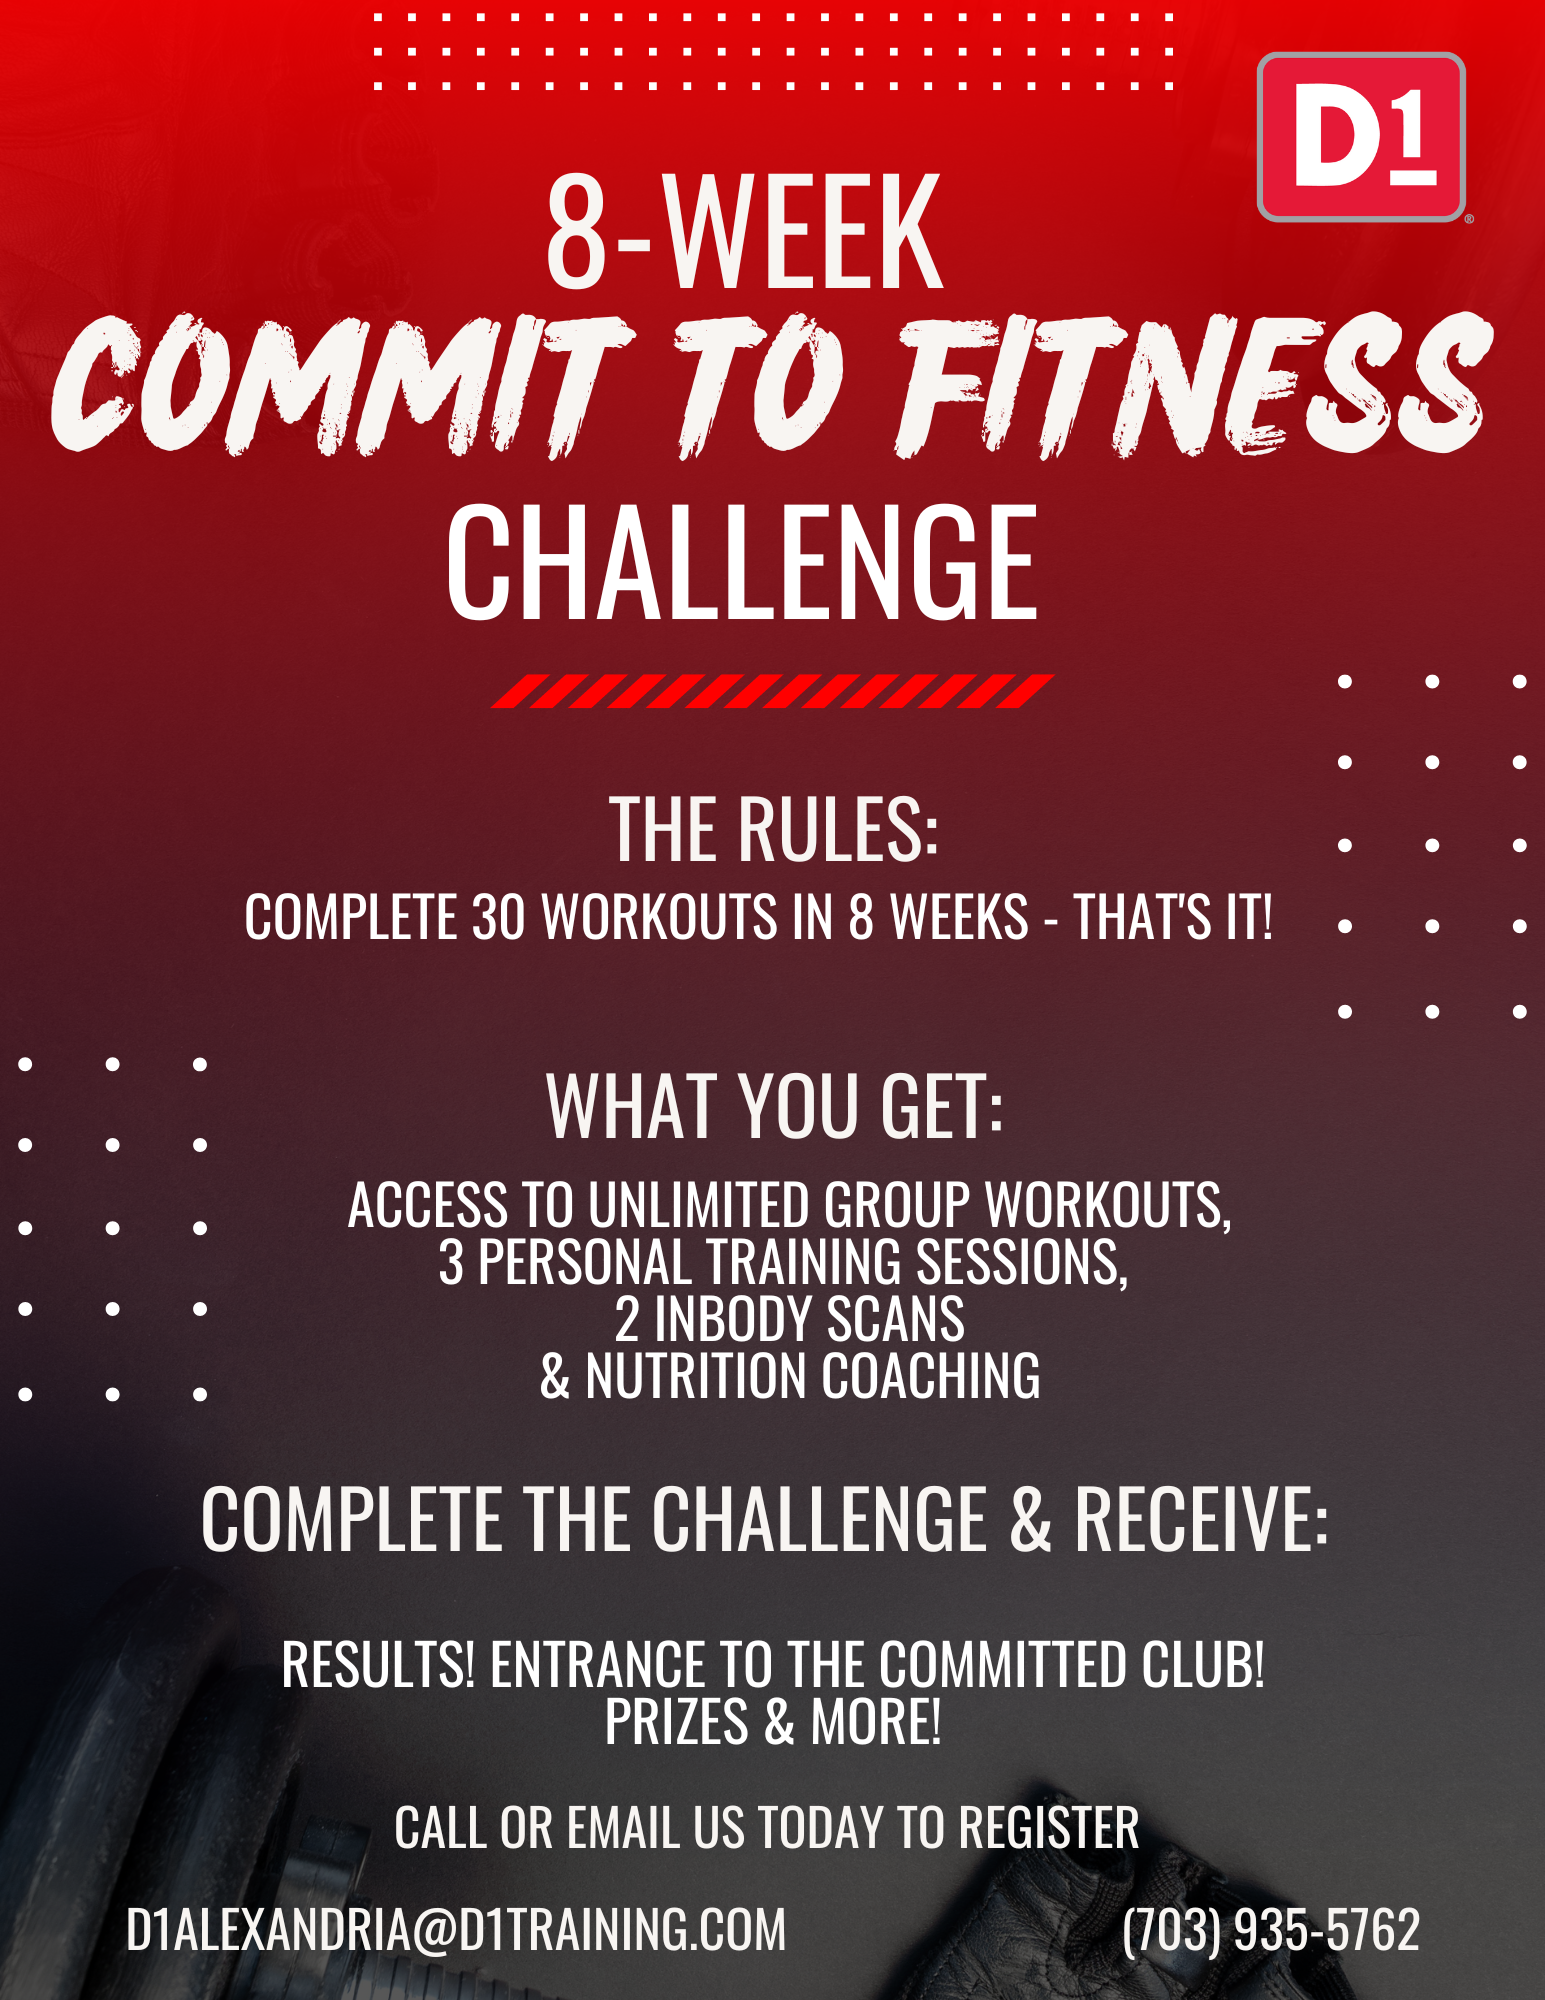 8-Week Commit to Fitness Challenge Flyer, Contact D1 Alexandria for More Info